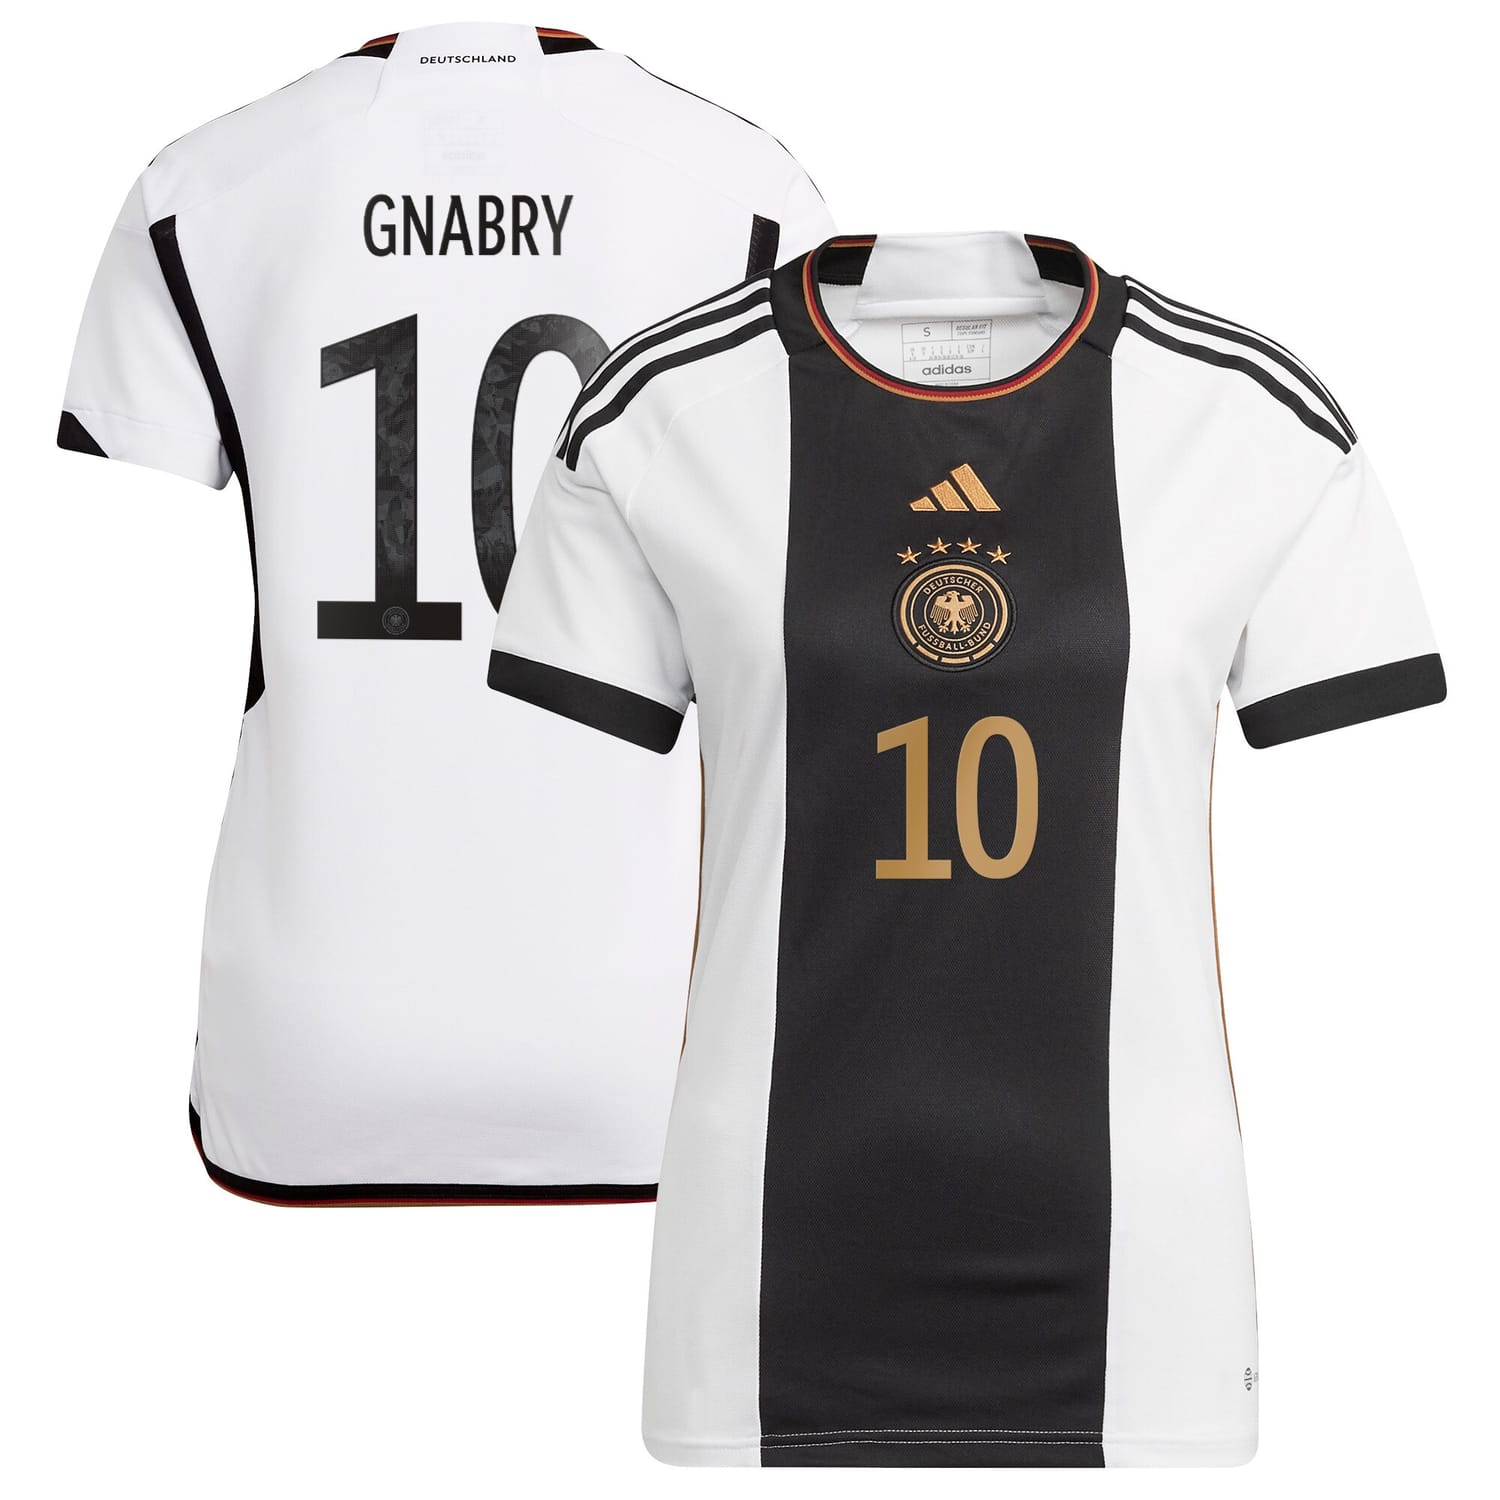 Germany National Team Home Jersey Shirt player Serge Gnabry 10 printing for Women